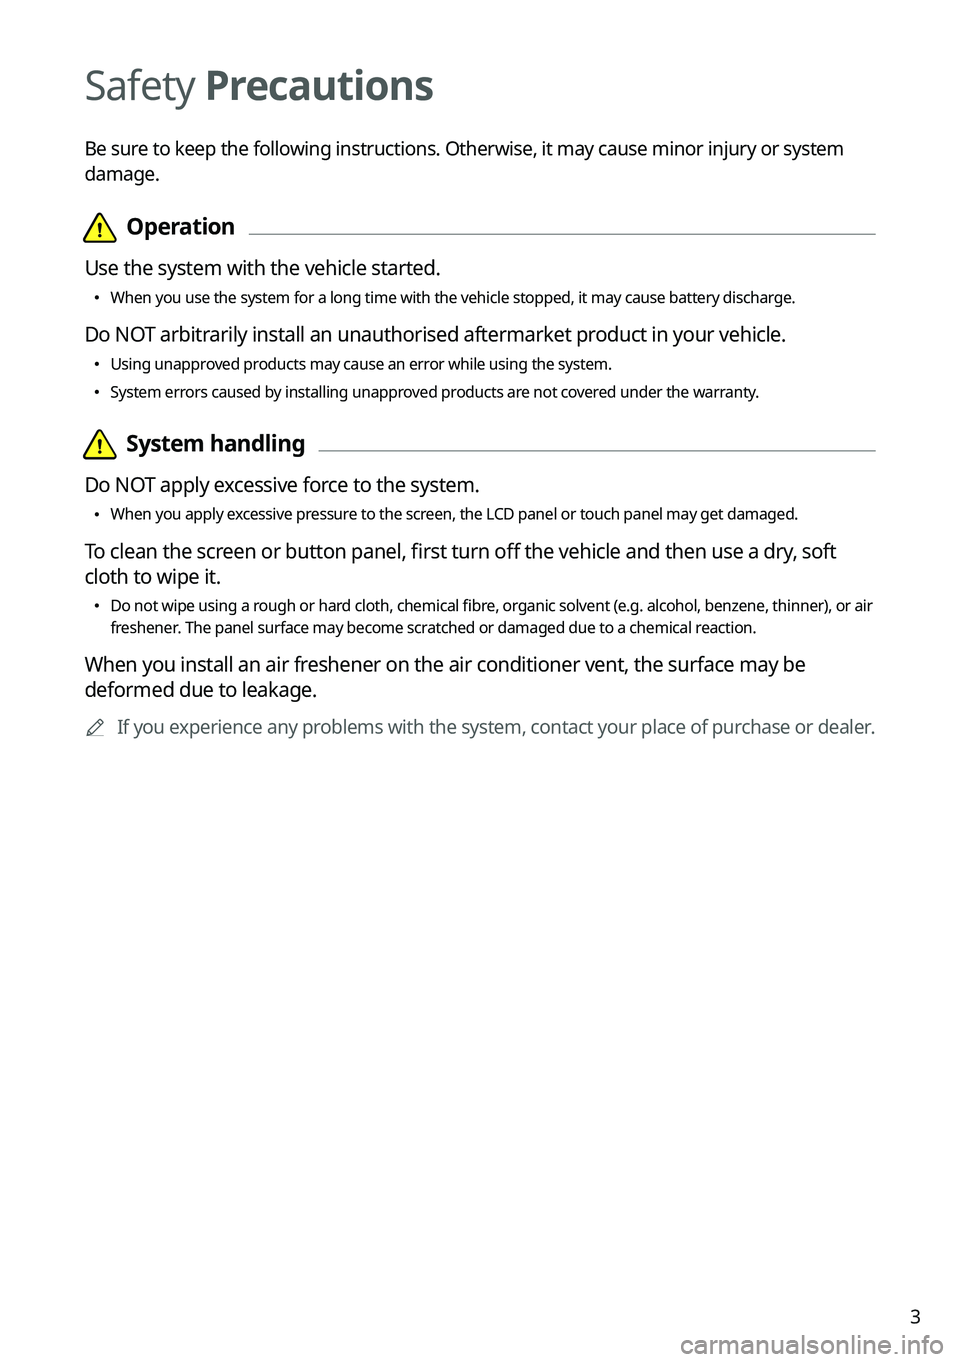 KIA SOUL 2023  Quick Reference Guide 3
Safety Precautions
Be sure to keep the following instructions. Otherwise, it may cause minor injury or system 
damage. 
  